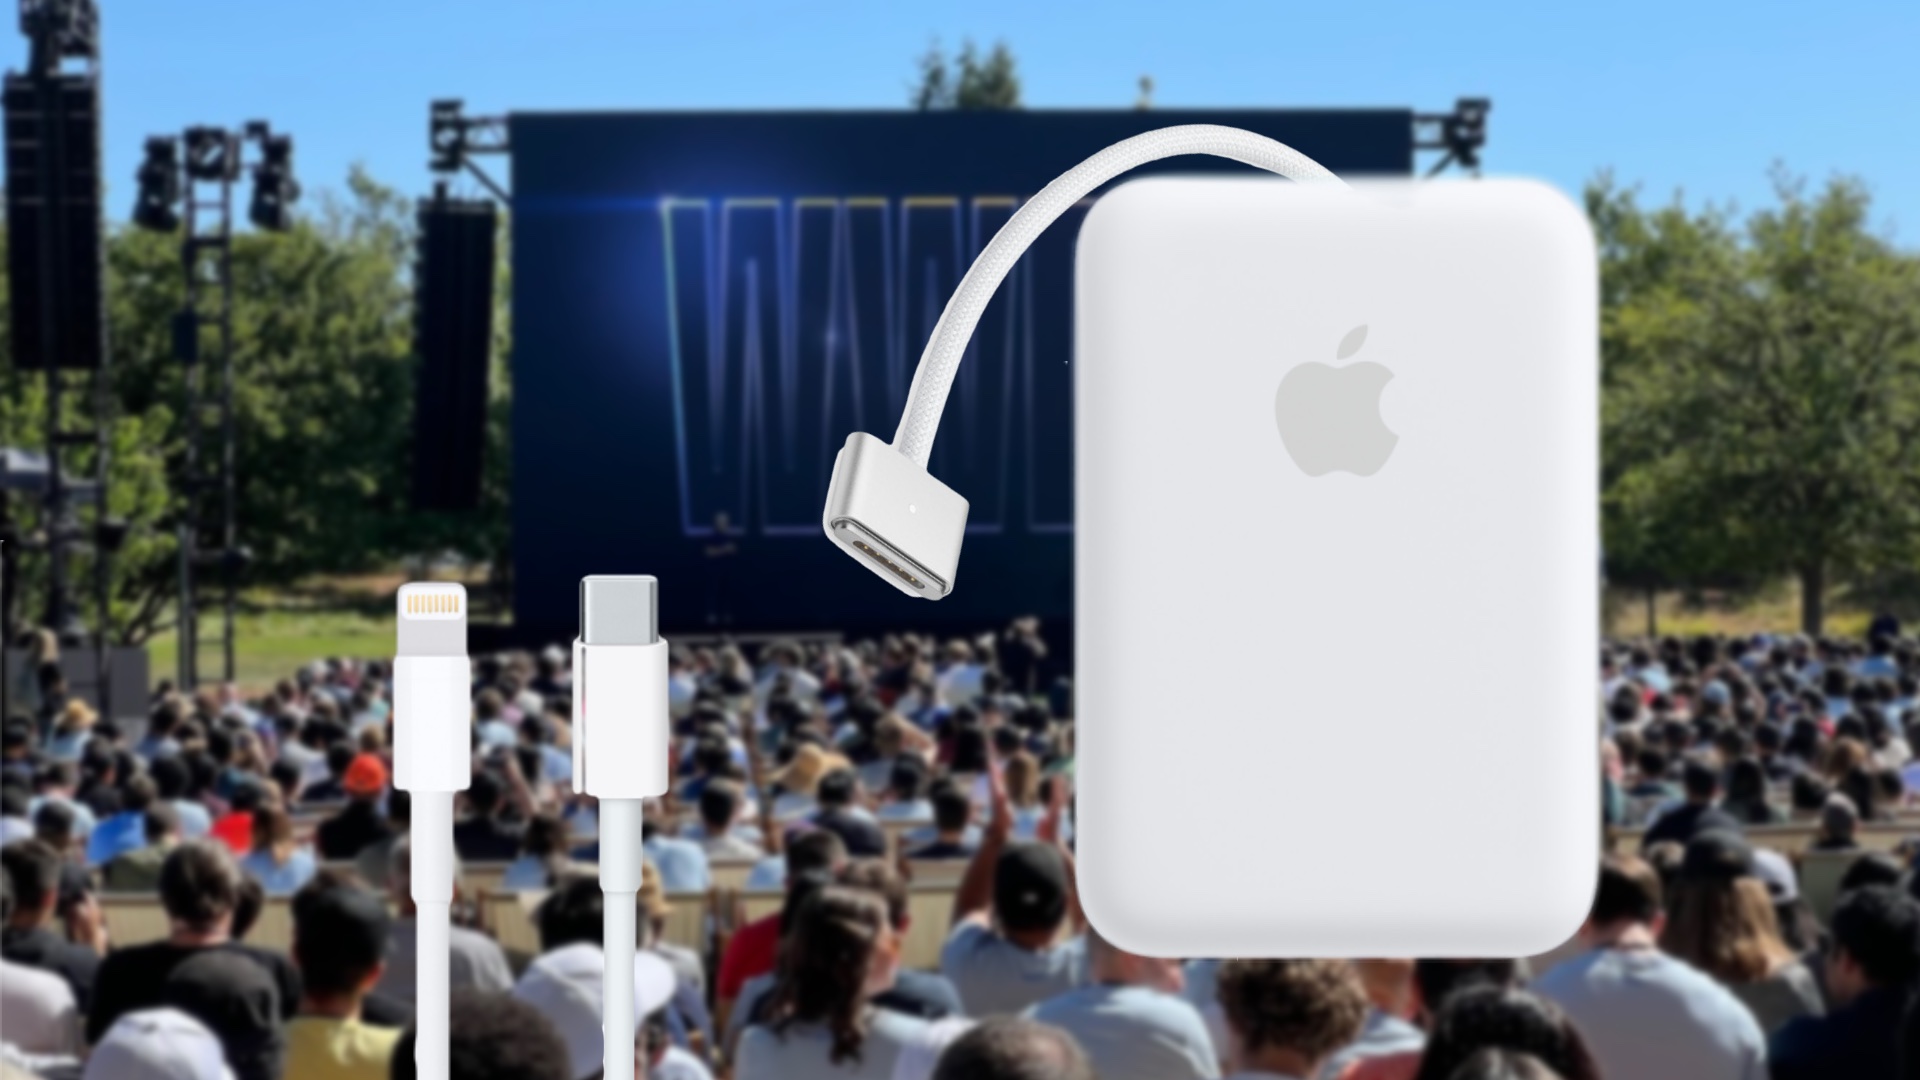 Forget Lightning and USB-C, Apple is preparing a new proprietary cable